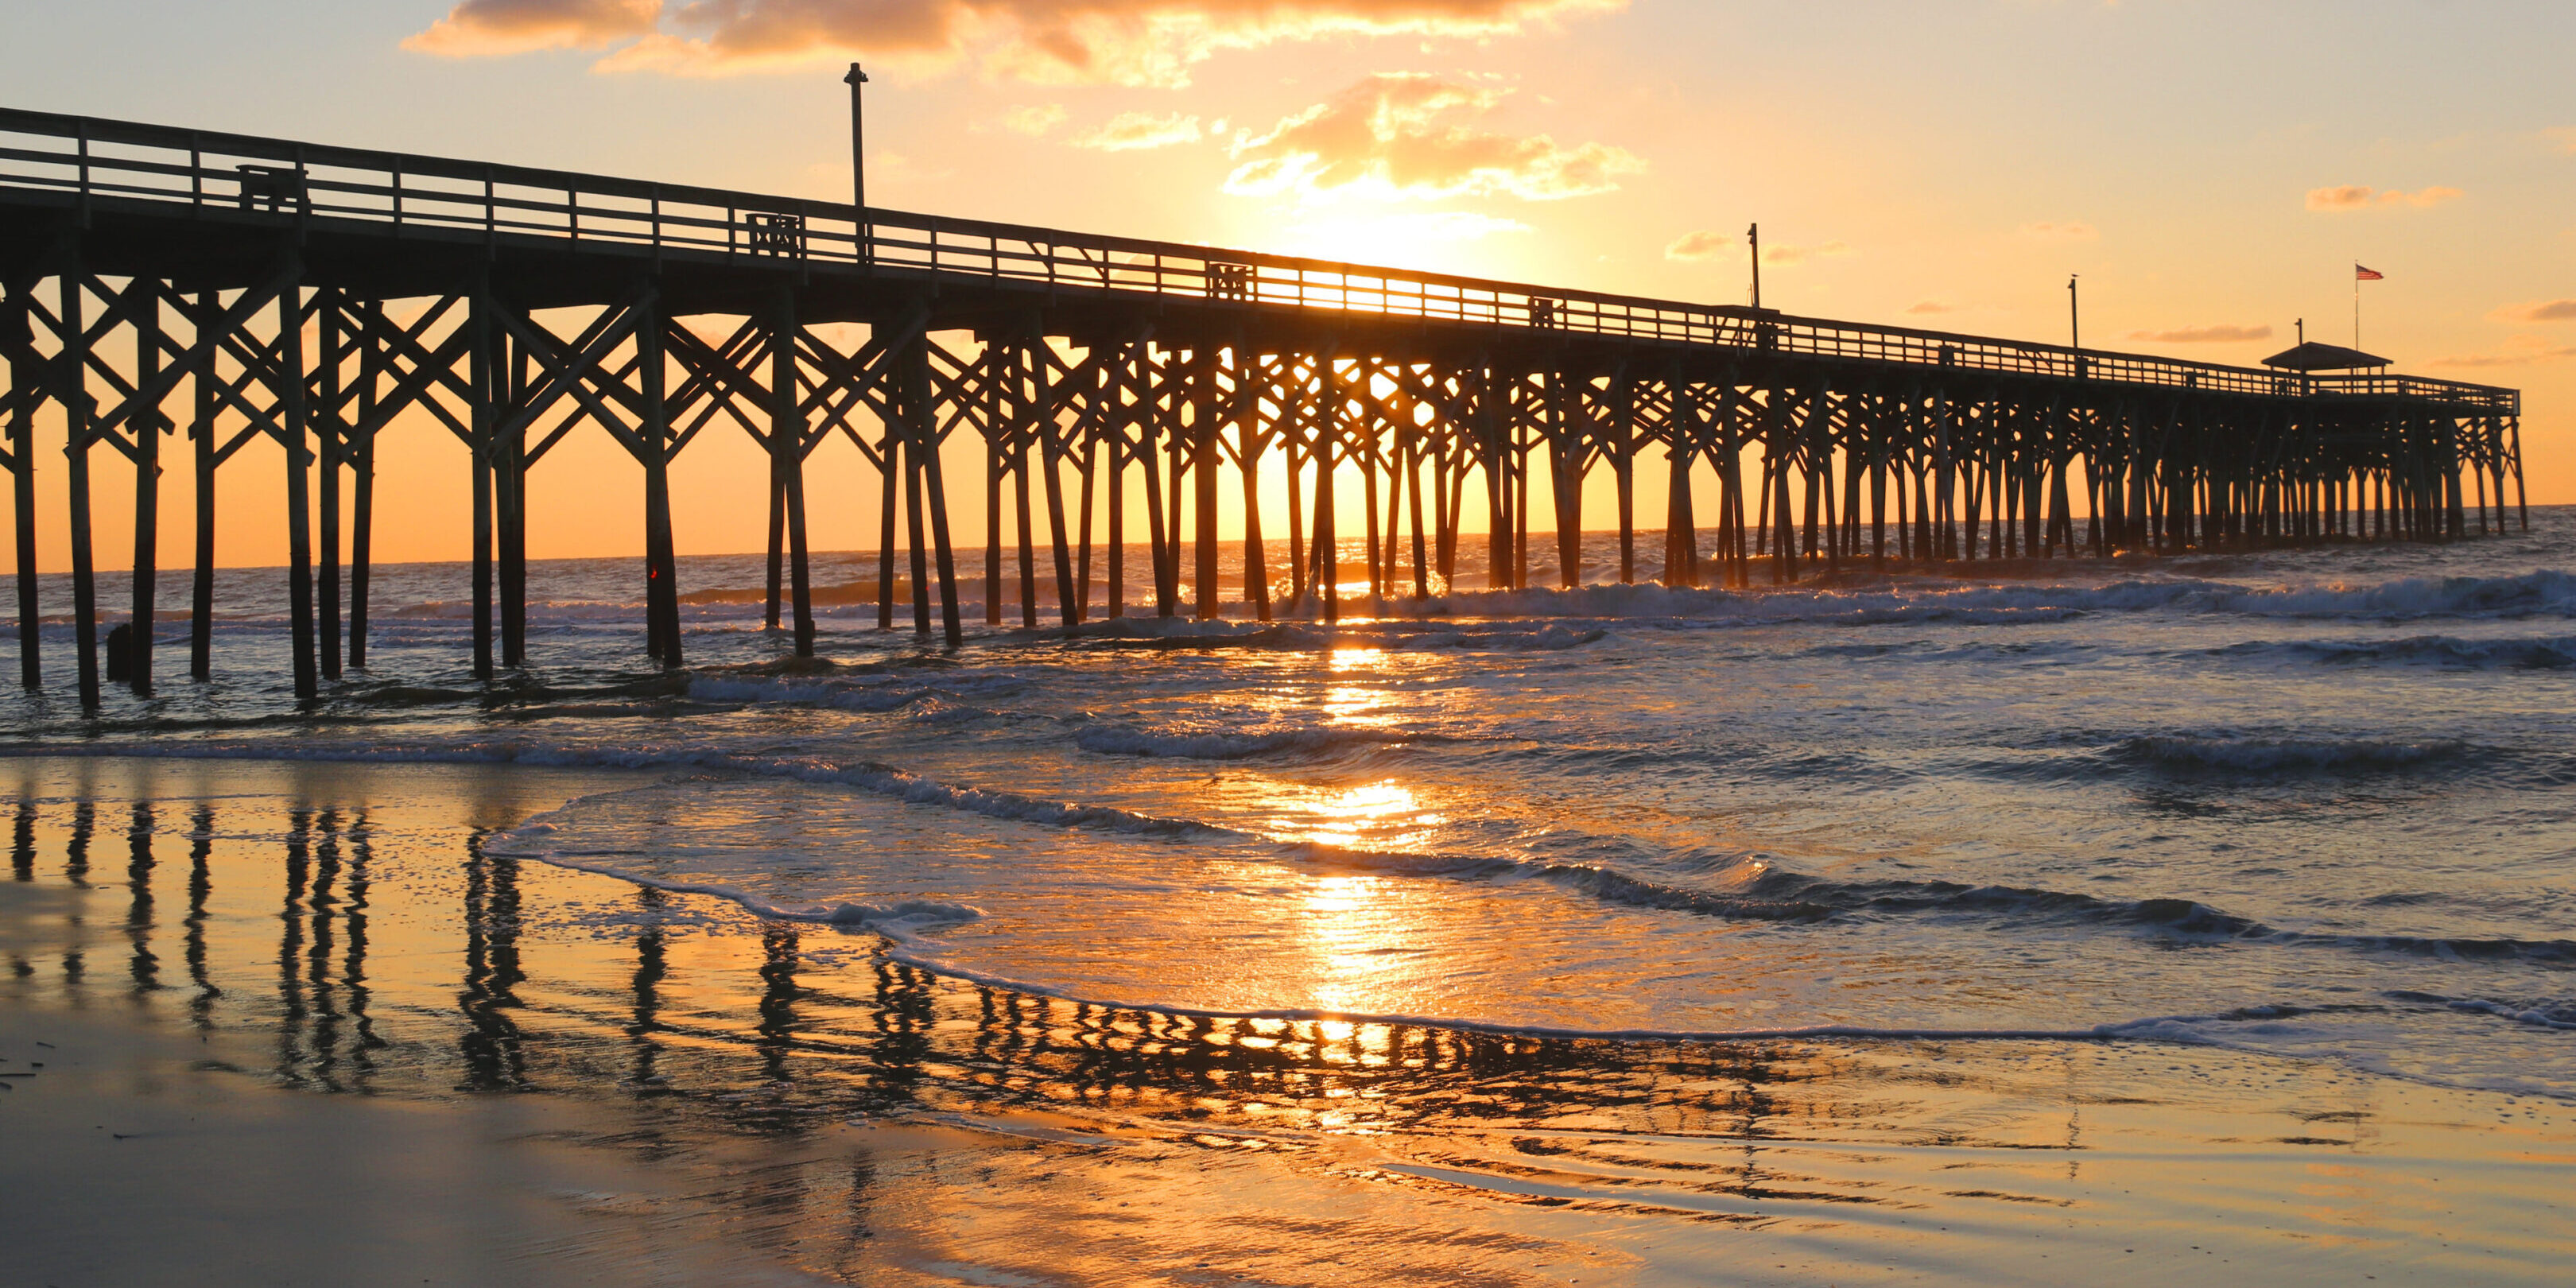 A pier with the sun setting over the ocean.